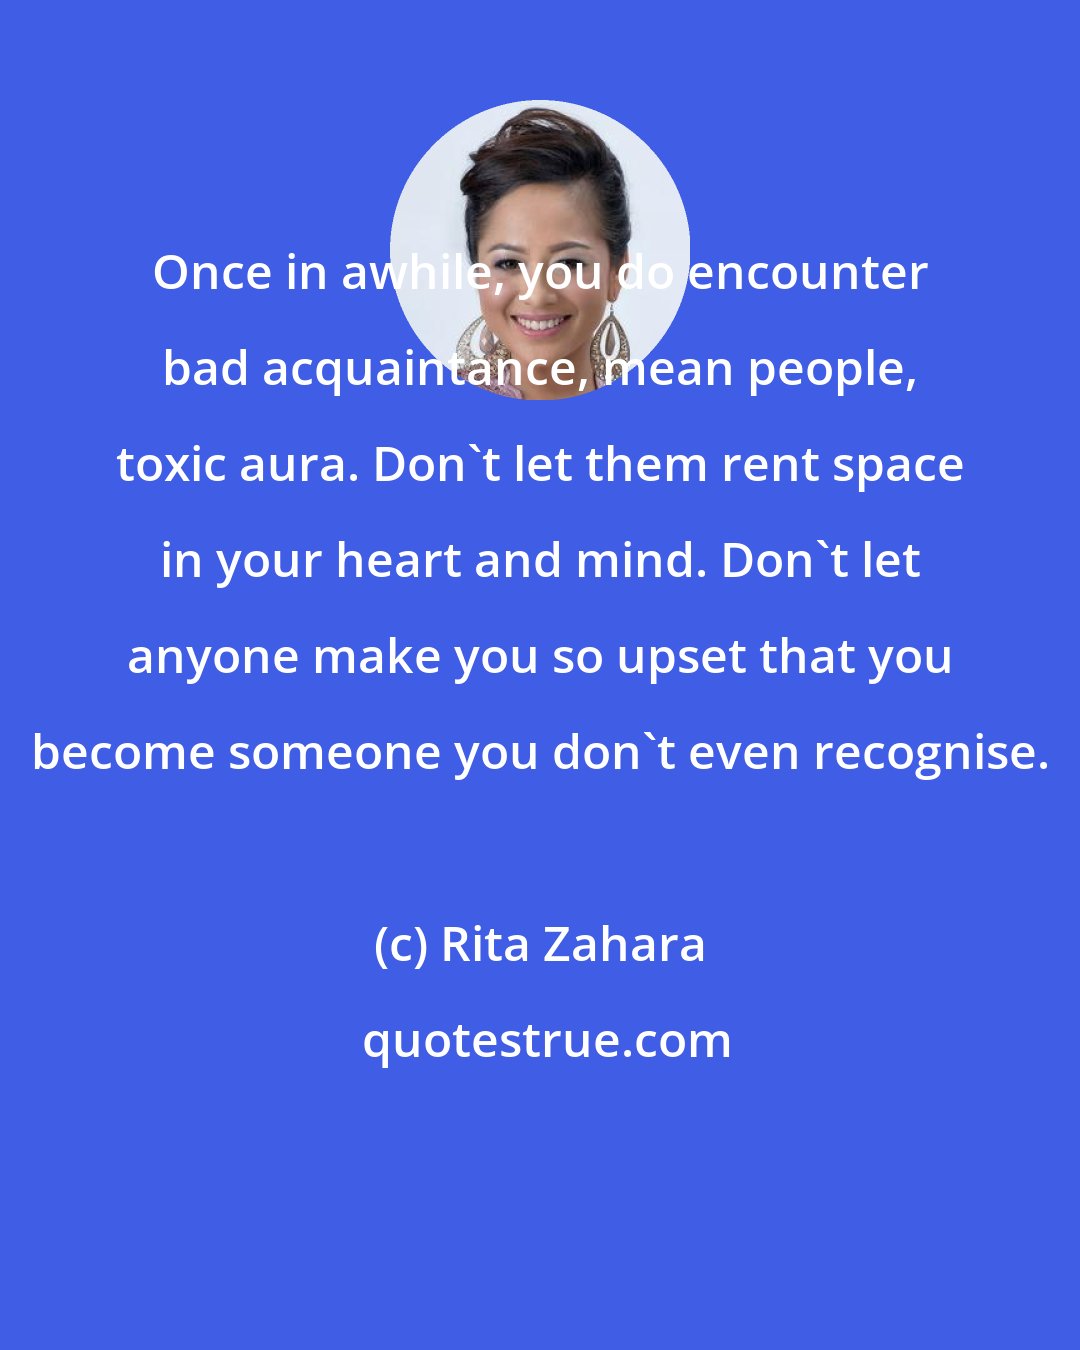 Rita Zahara: Once in awhile, you do encounter bad acquaintance, mean people, toxic aura. Don't let them rent space in your heart and mind. Don't let anyone make you so upset that you become someone you don't even recognise.